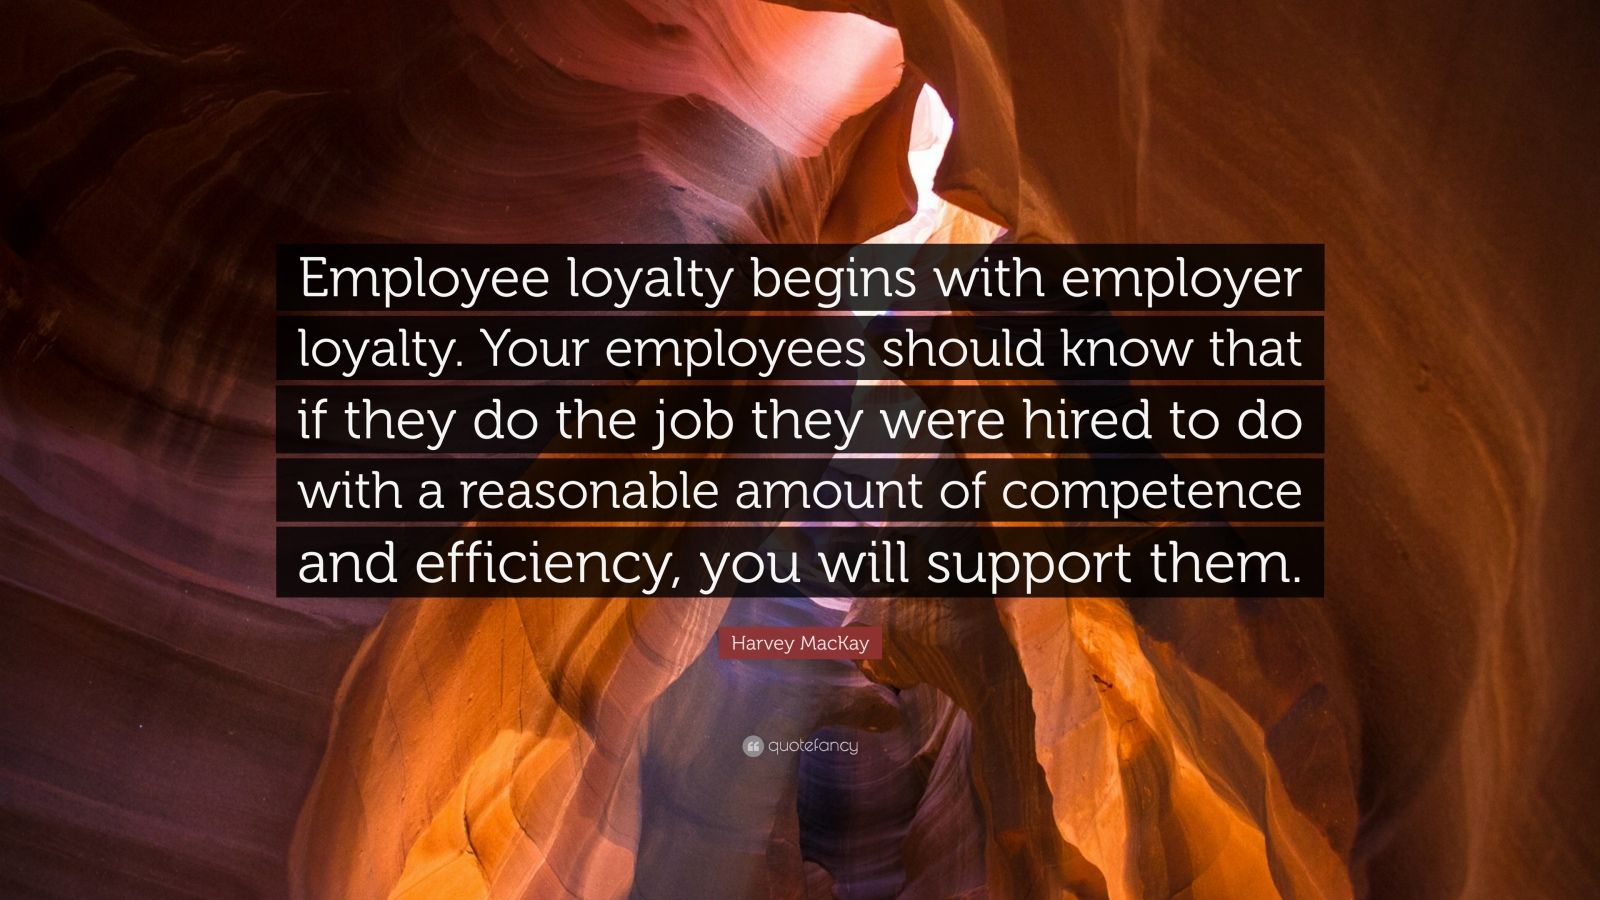 Loyalty Quotes (40 wallpapers) - Quotefancy